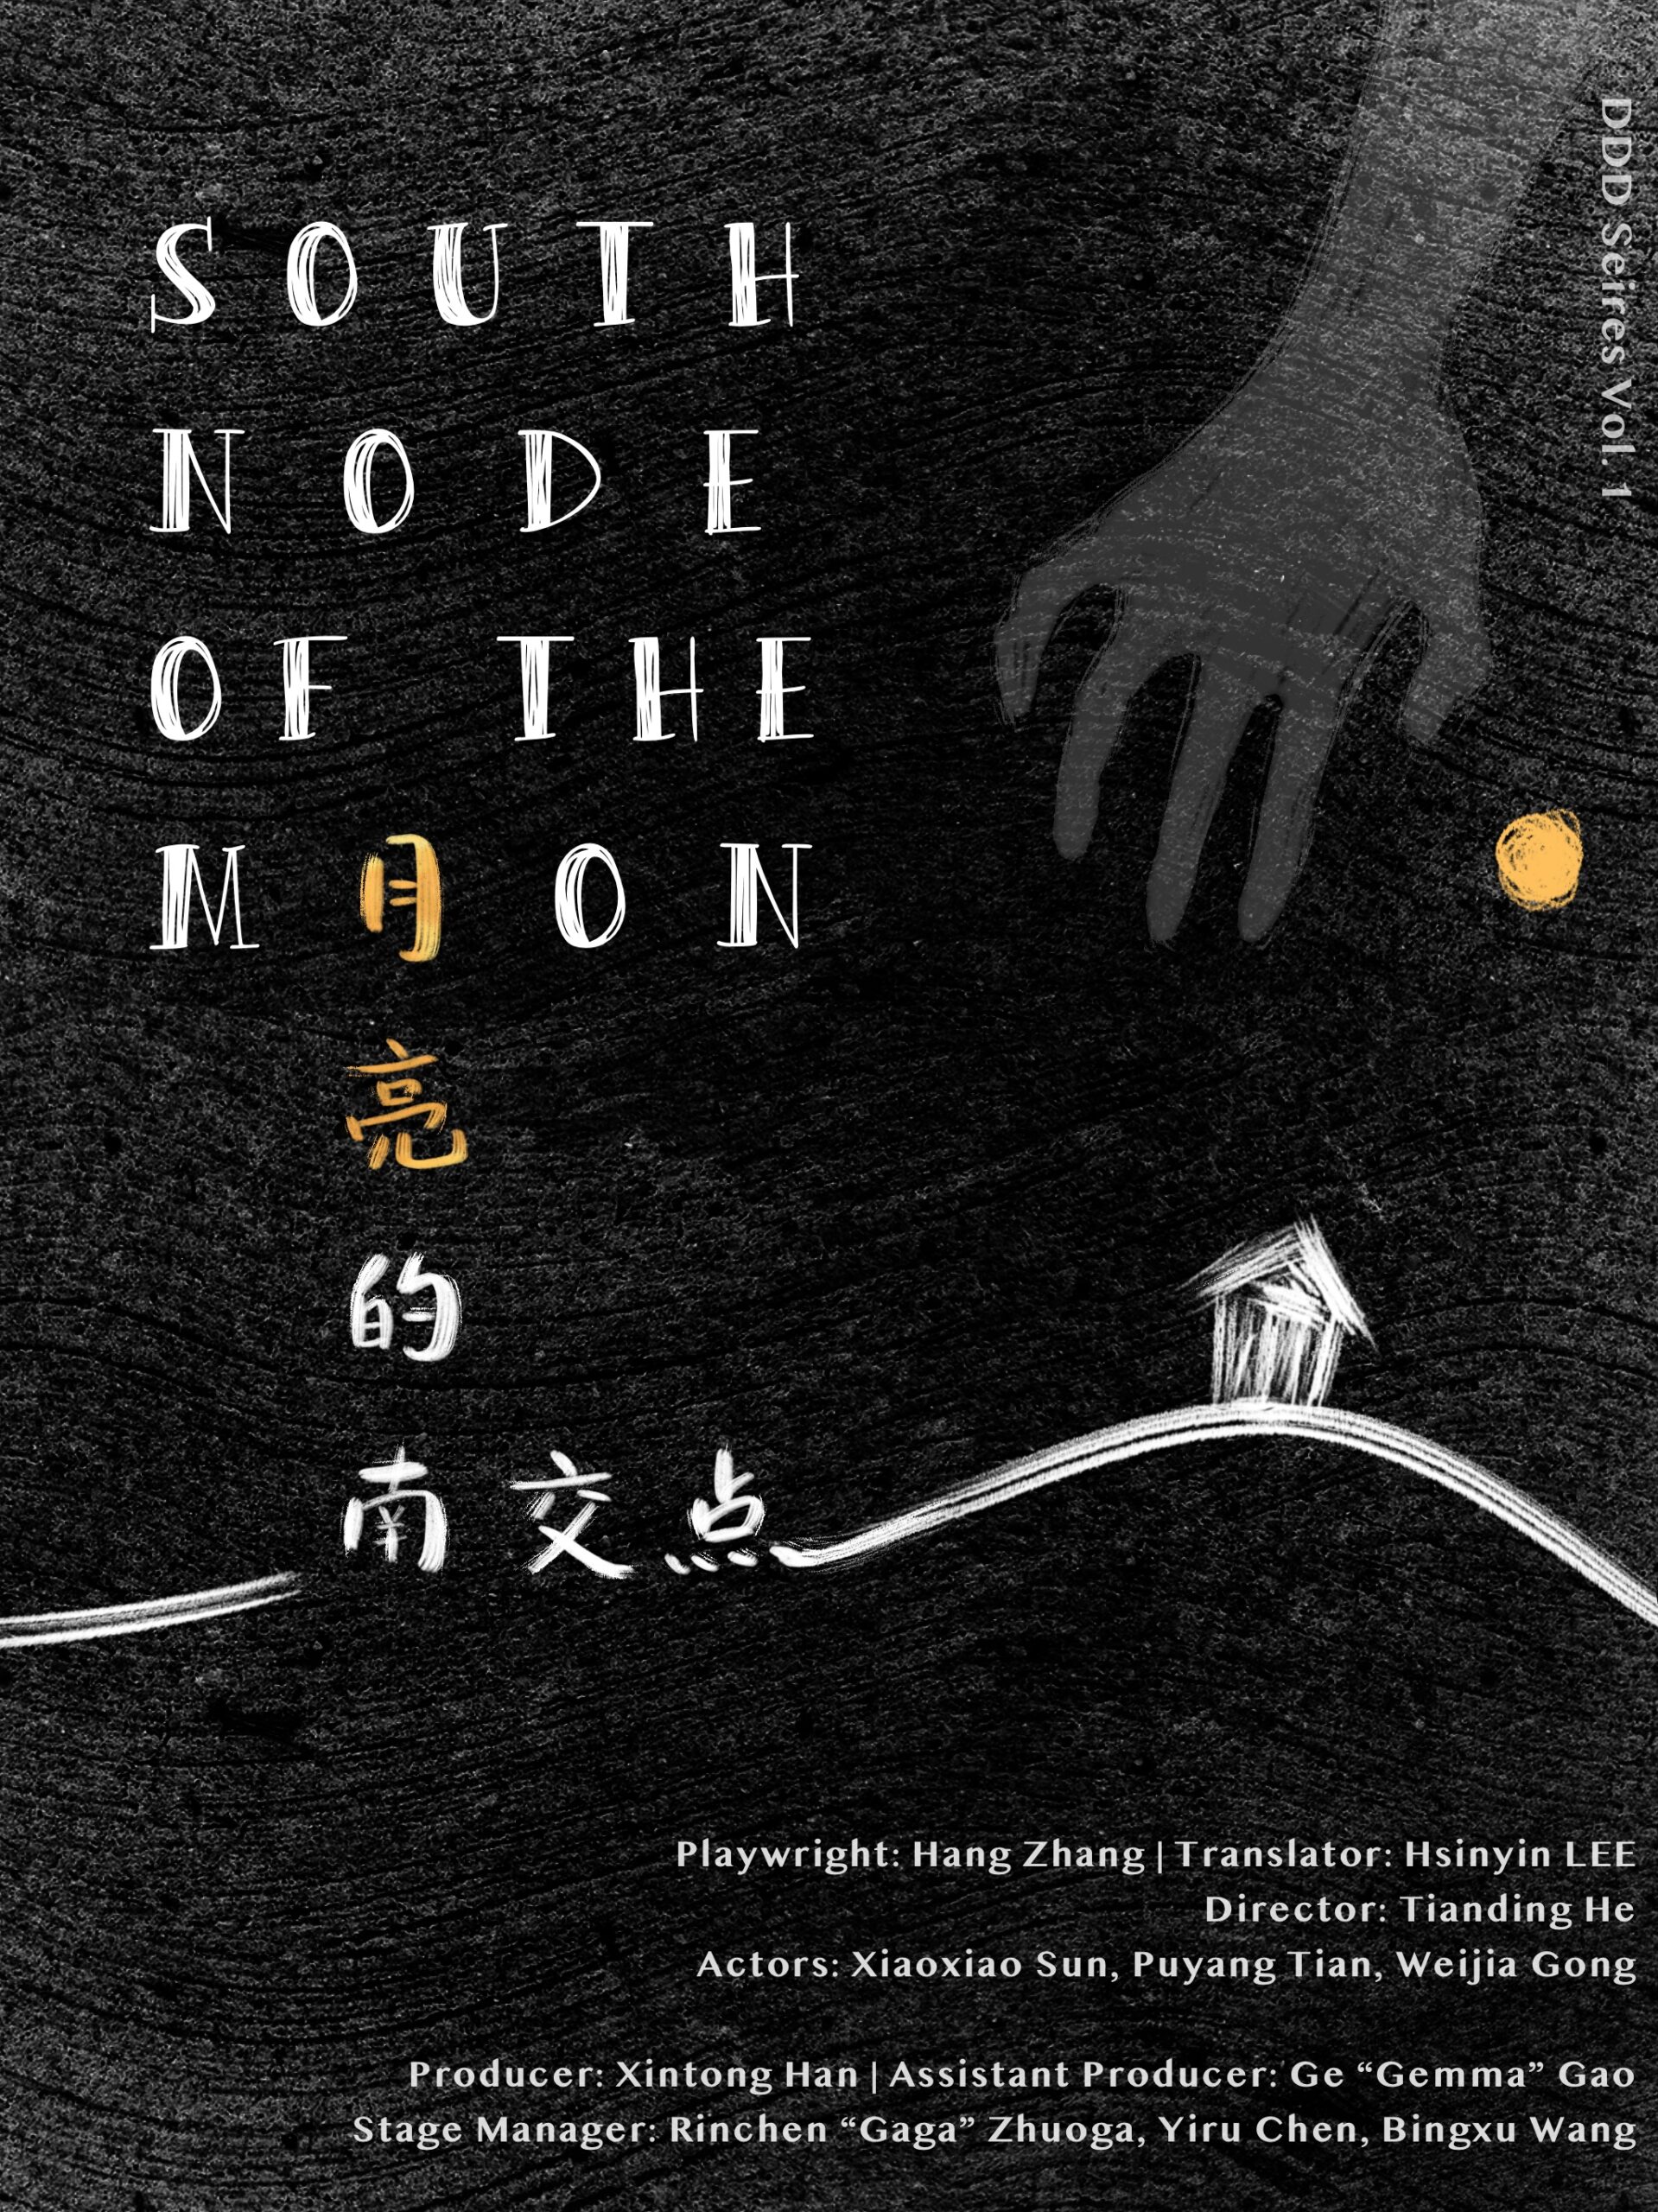 South Node of the Moon by Tianding He